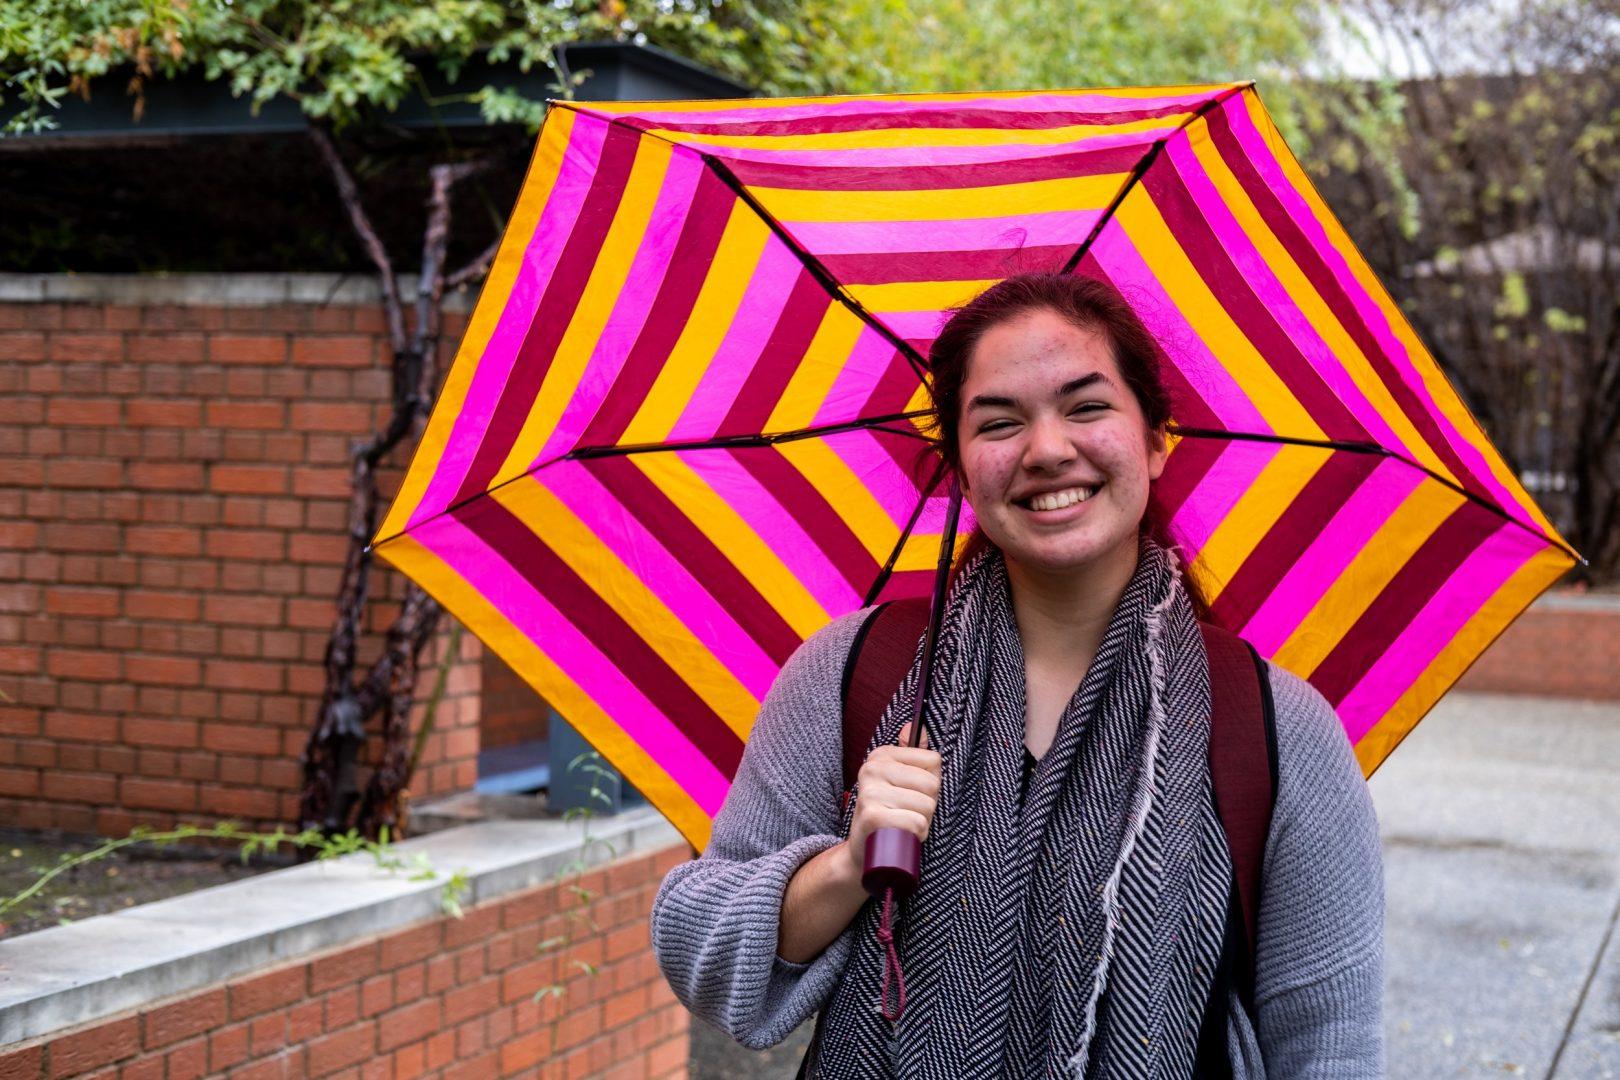 Victoria Laws (pictured above) is a student in Fresno States ASL Interpreting program, studying to be an interpreter. (Zaeem Shaikh/The Collegian)